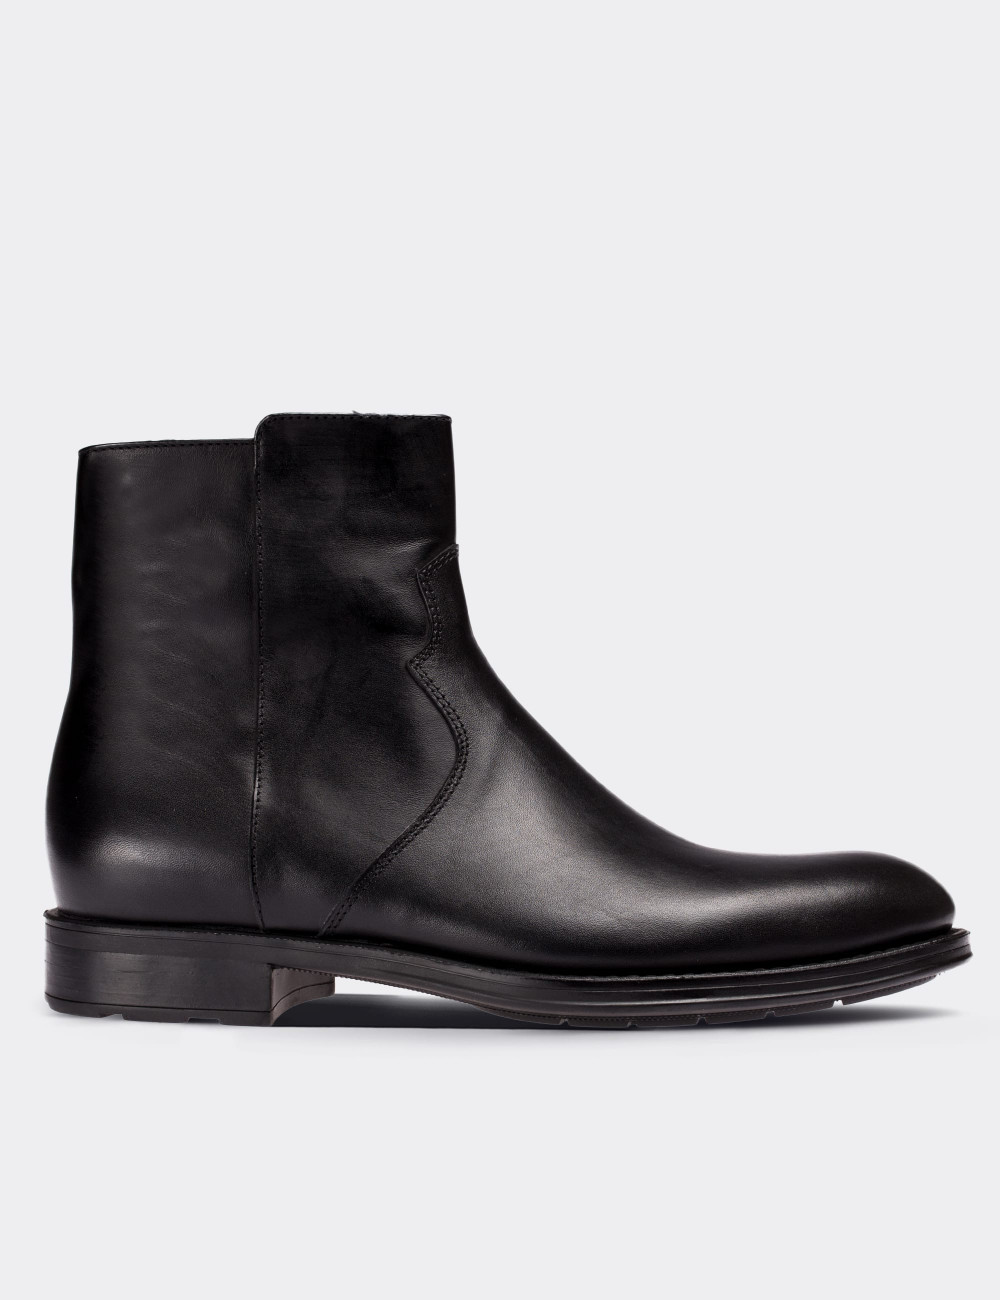 Black  Leather Boots - 01747MSYHC01